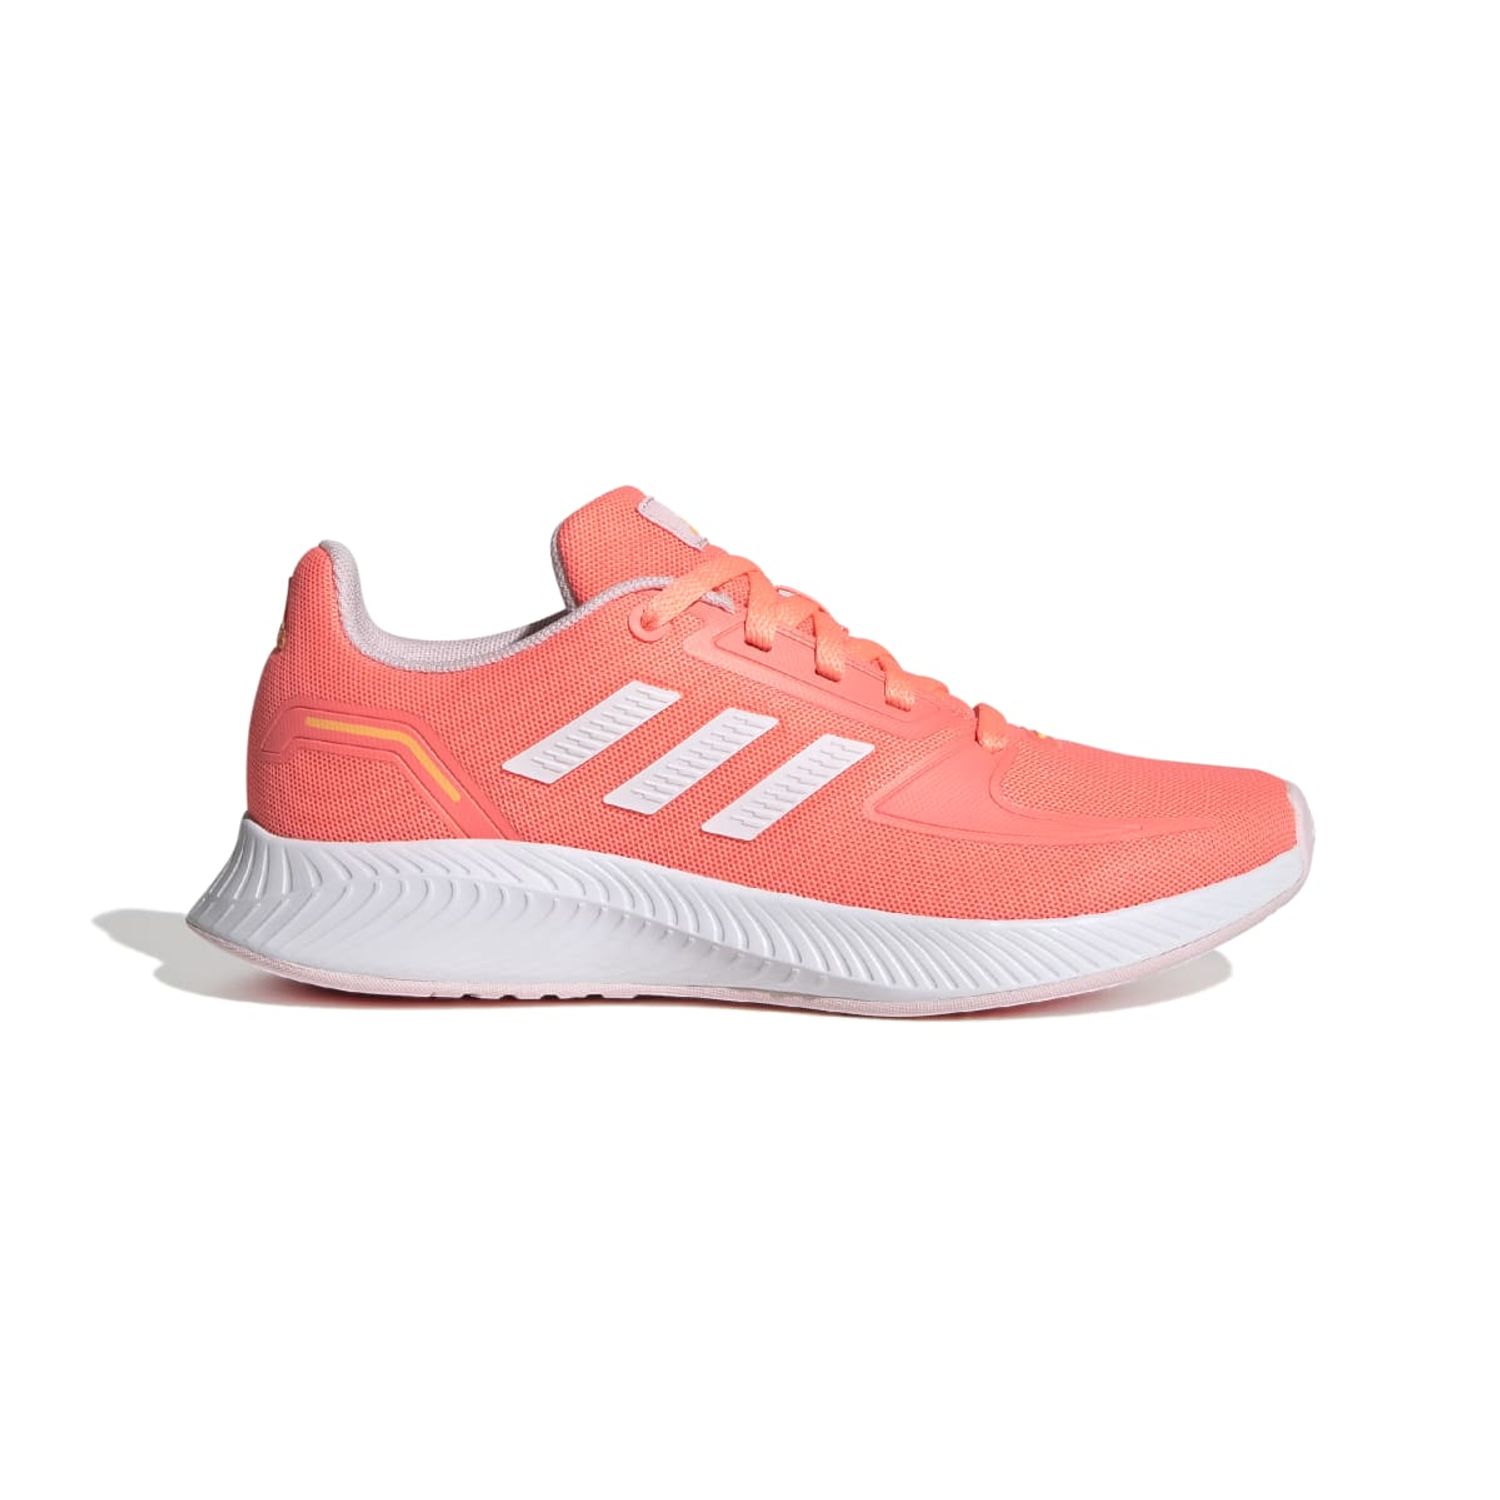 Coral adidas Childrens Runfalcon 2.0 - Get The